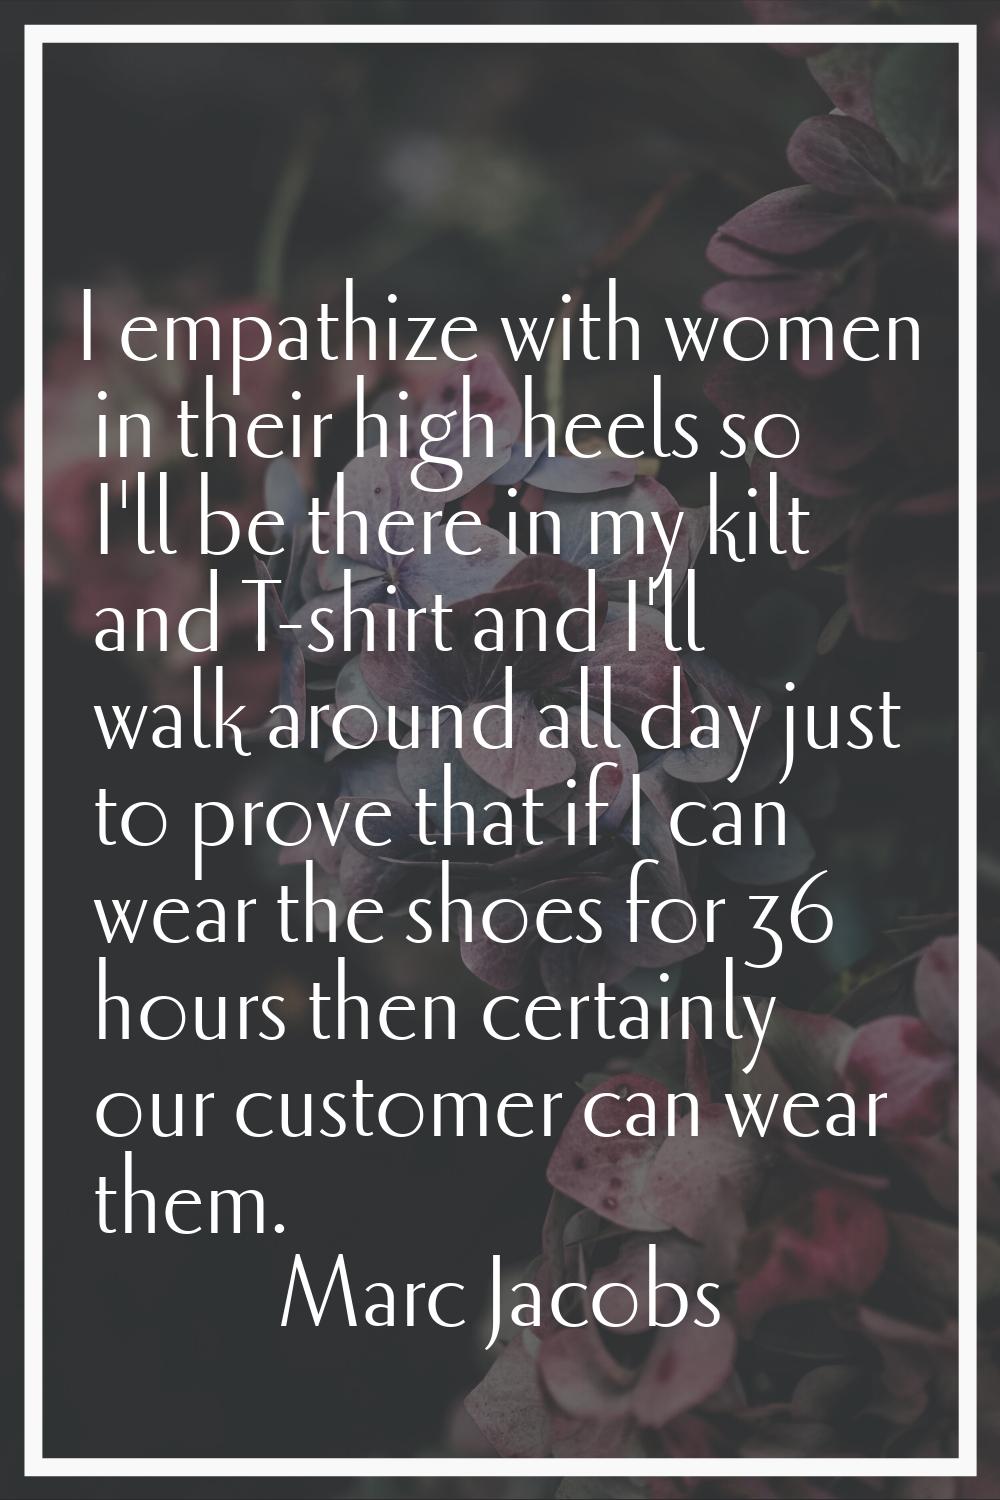 I empathize with women in their high heels so I'll be there in my kilt and T-shirt and I'll walk ar